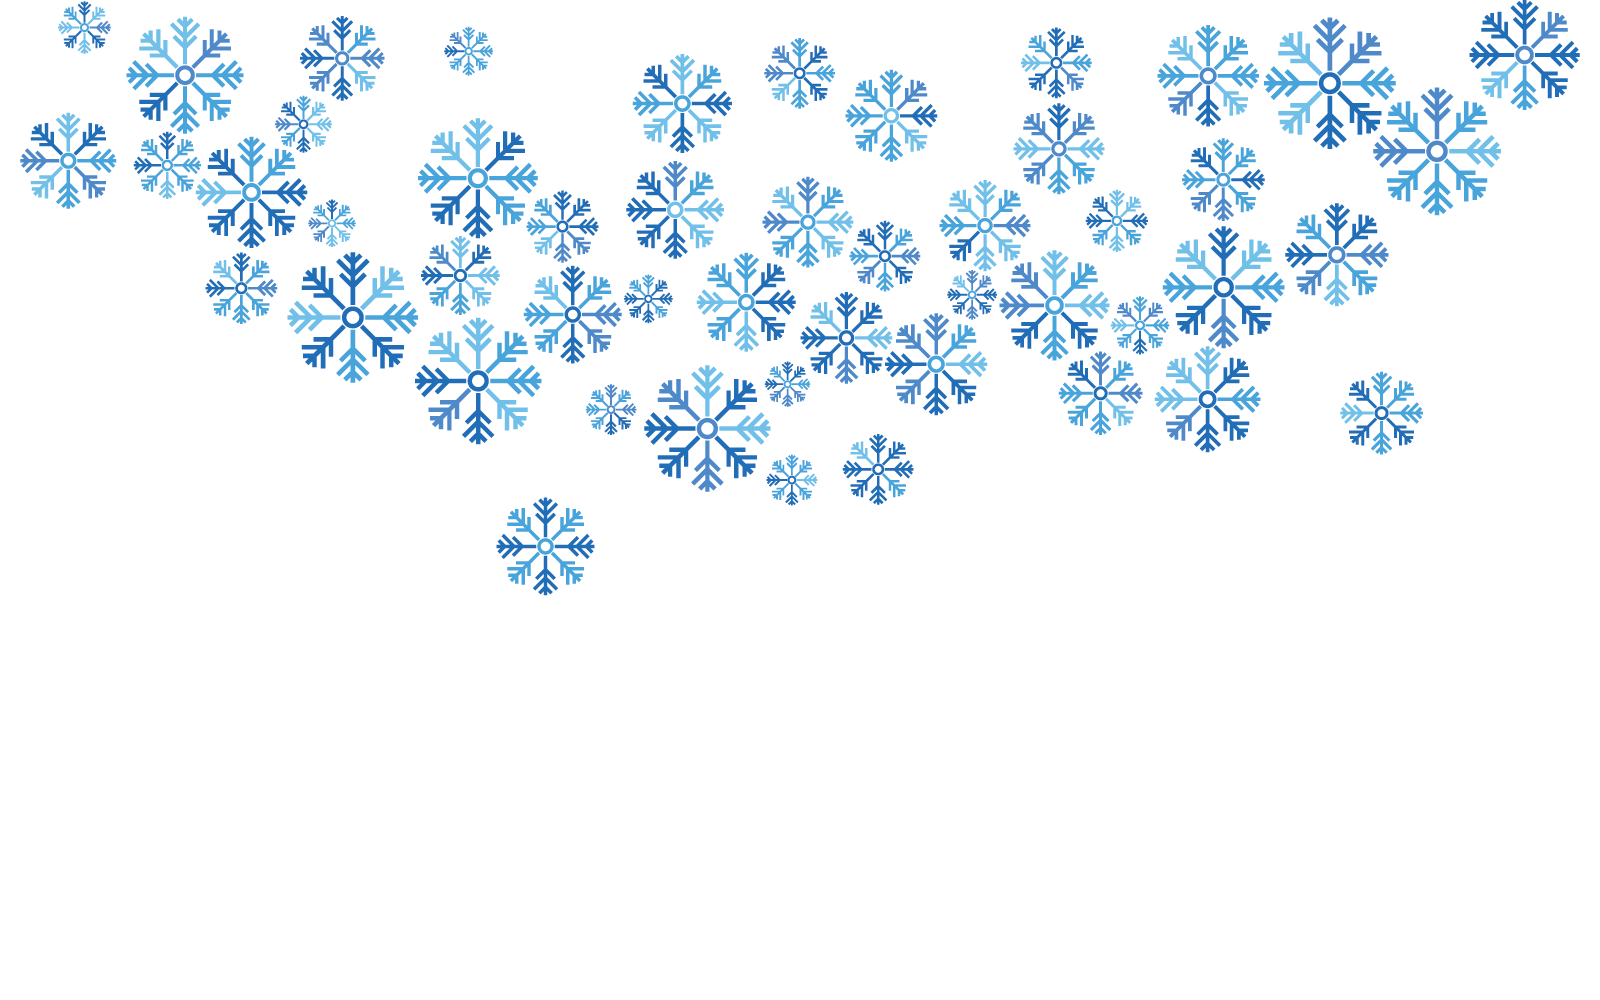 Snowflakes for background template illustration vector